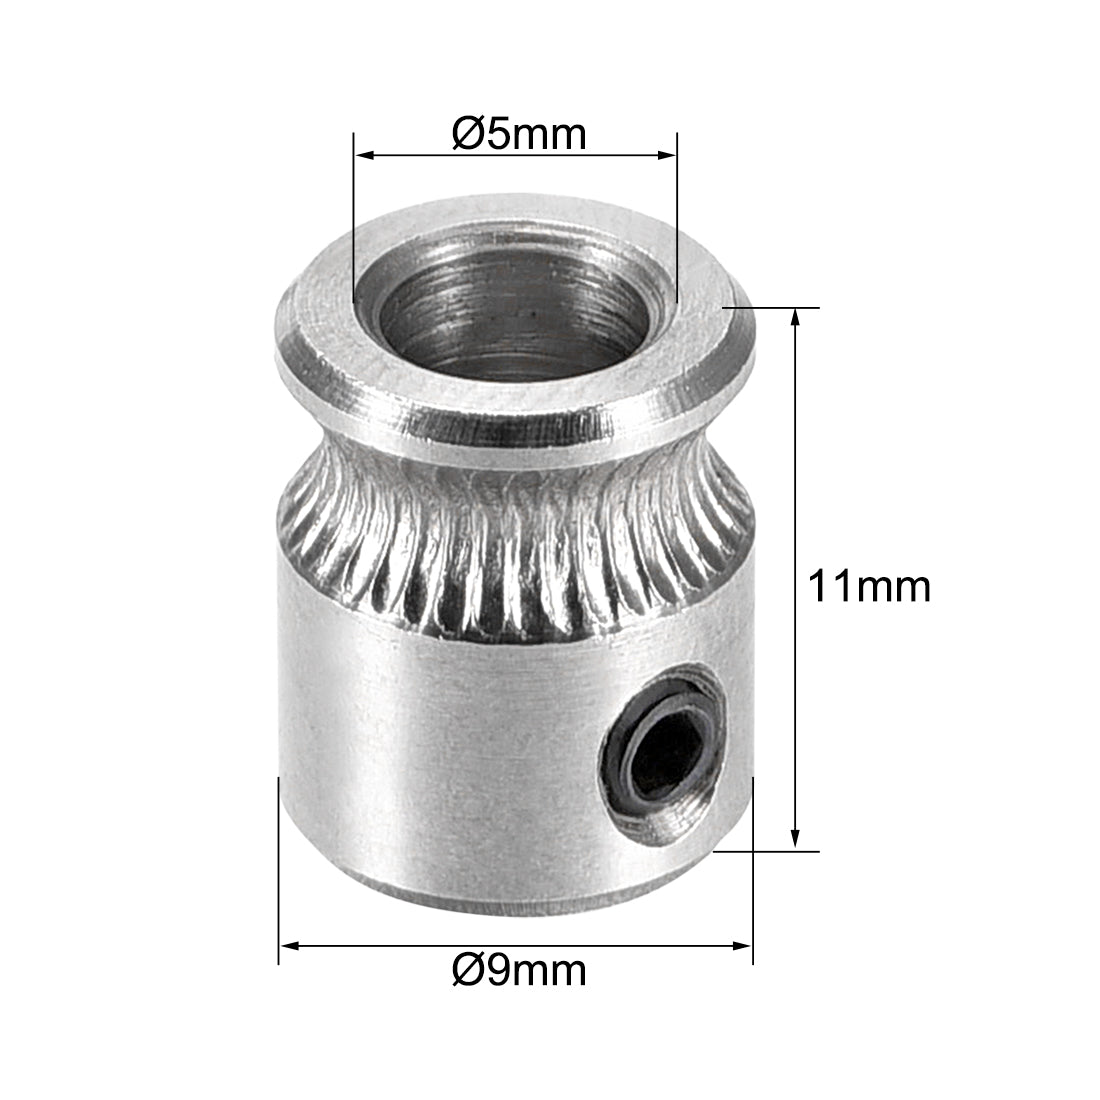 uxcell Uxcell MK8 Drive Gear Direct Extruder Drive 5mm Bore for Extruder 5pcs